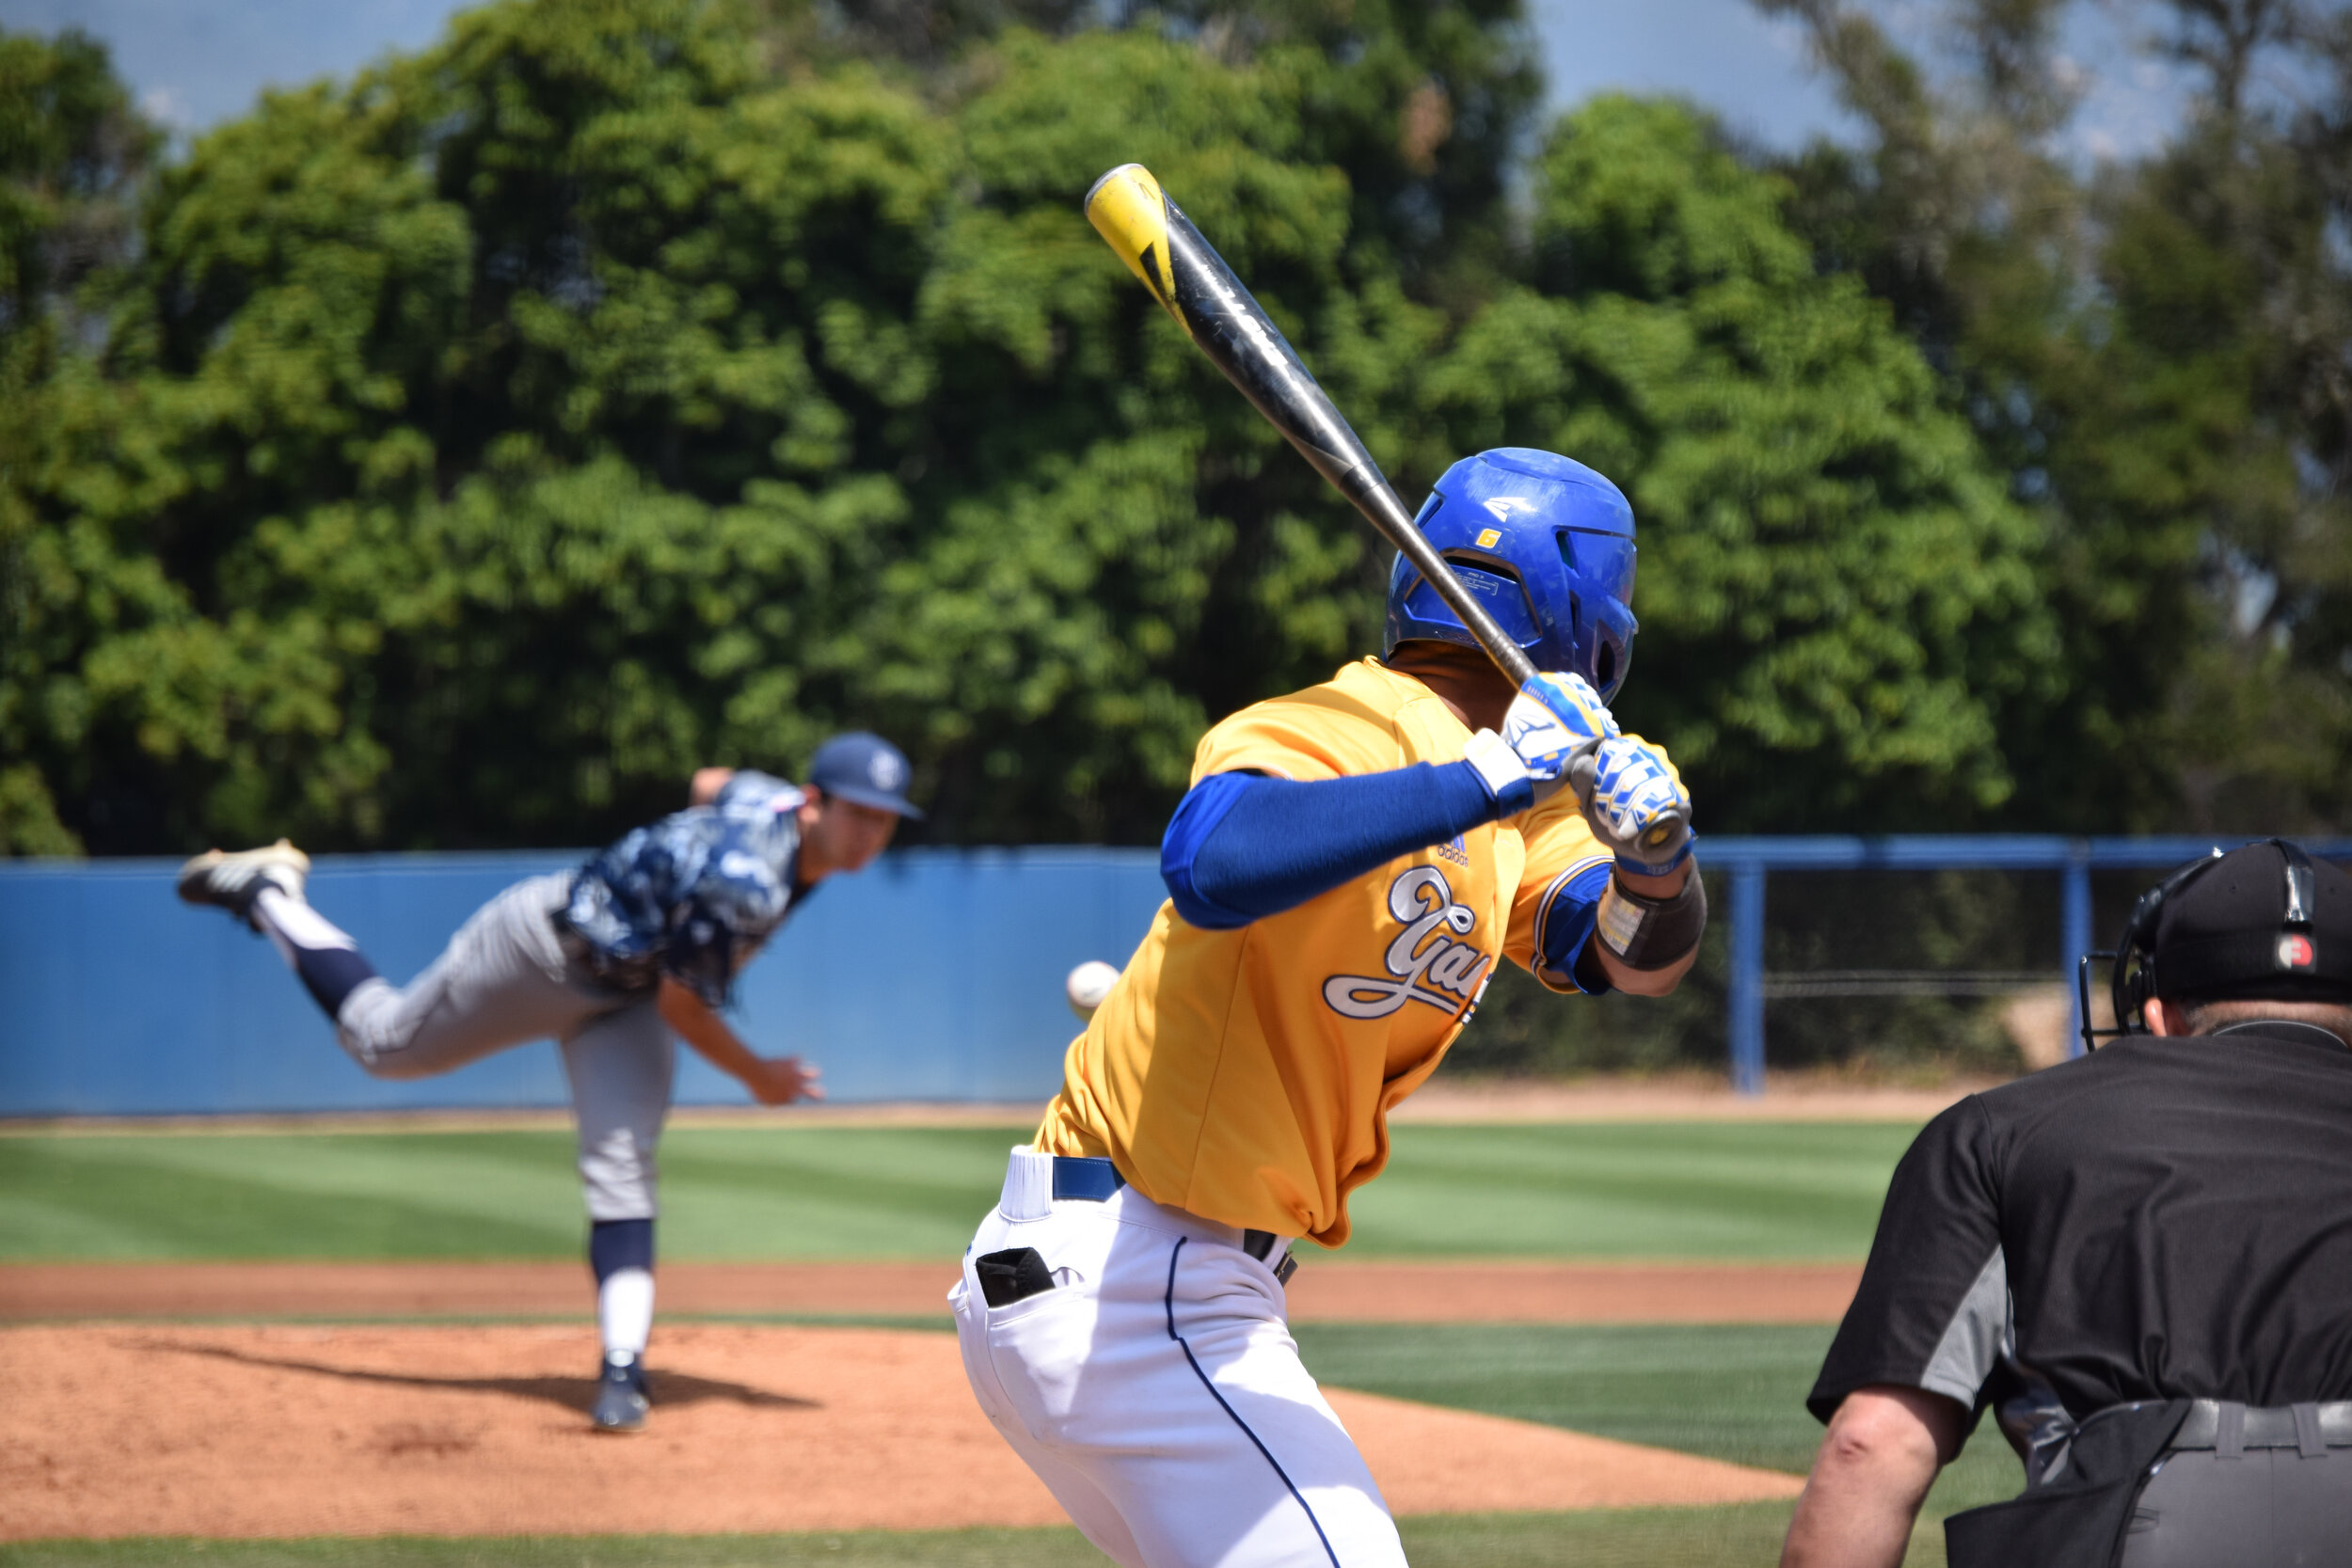  Tevin Mitchell, of the UCSB Gauchos, against UC Irvine. 